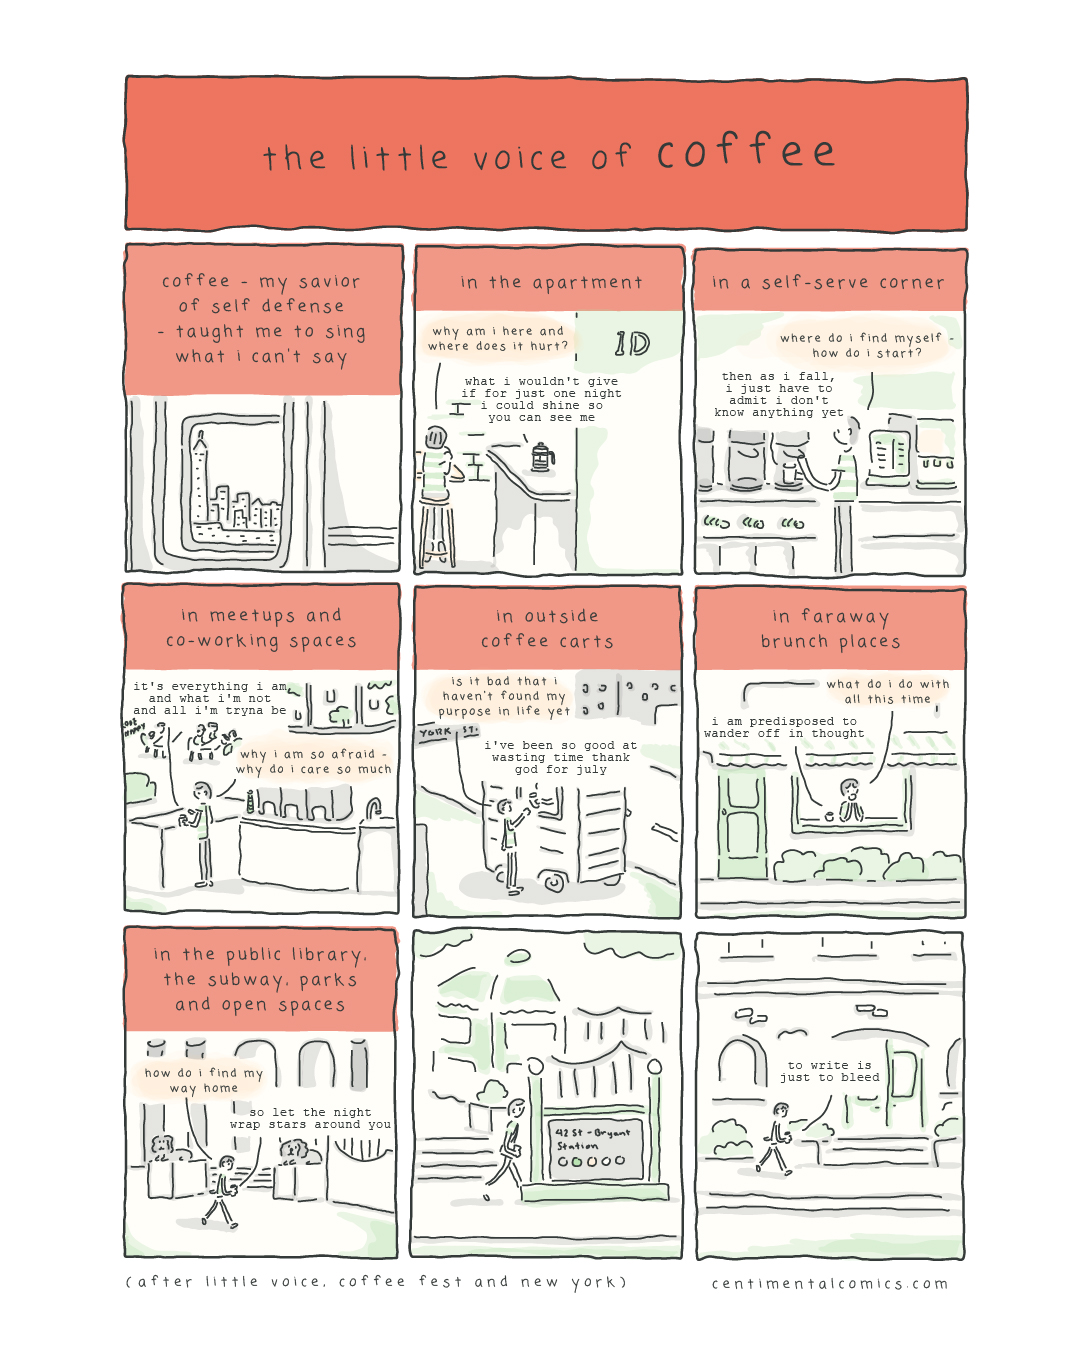 the little voice of coffee